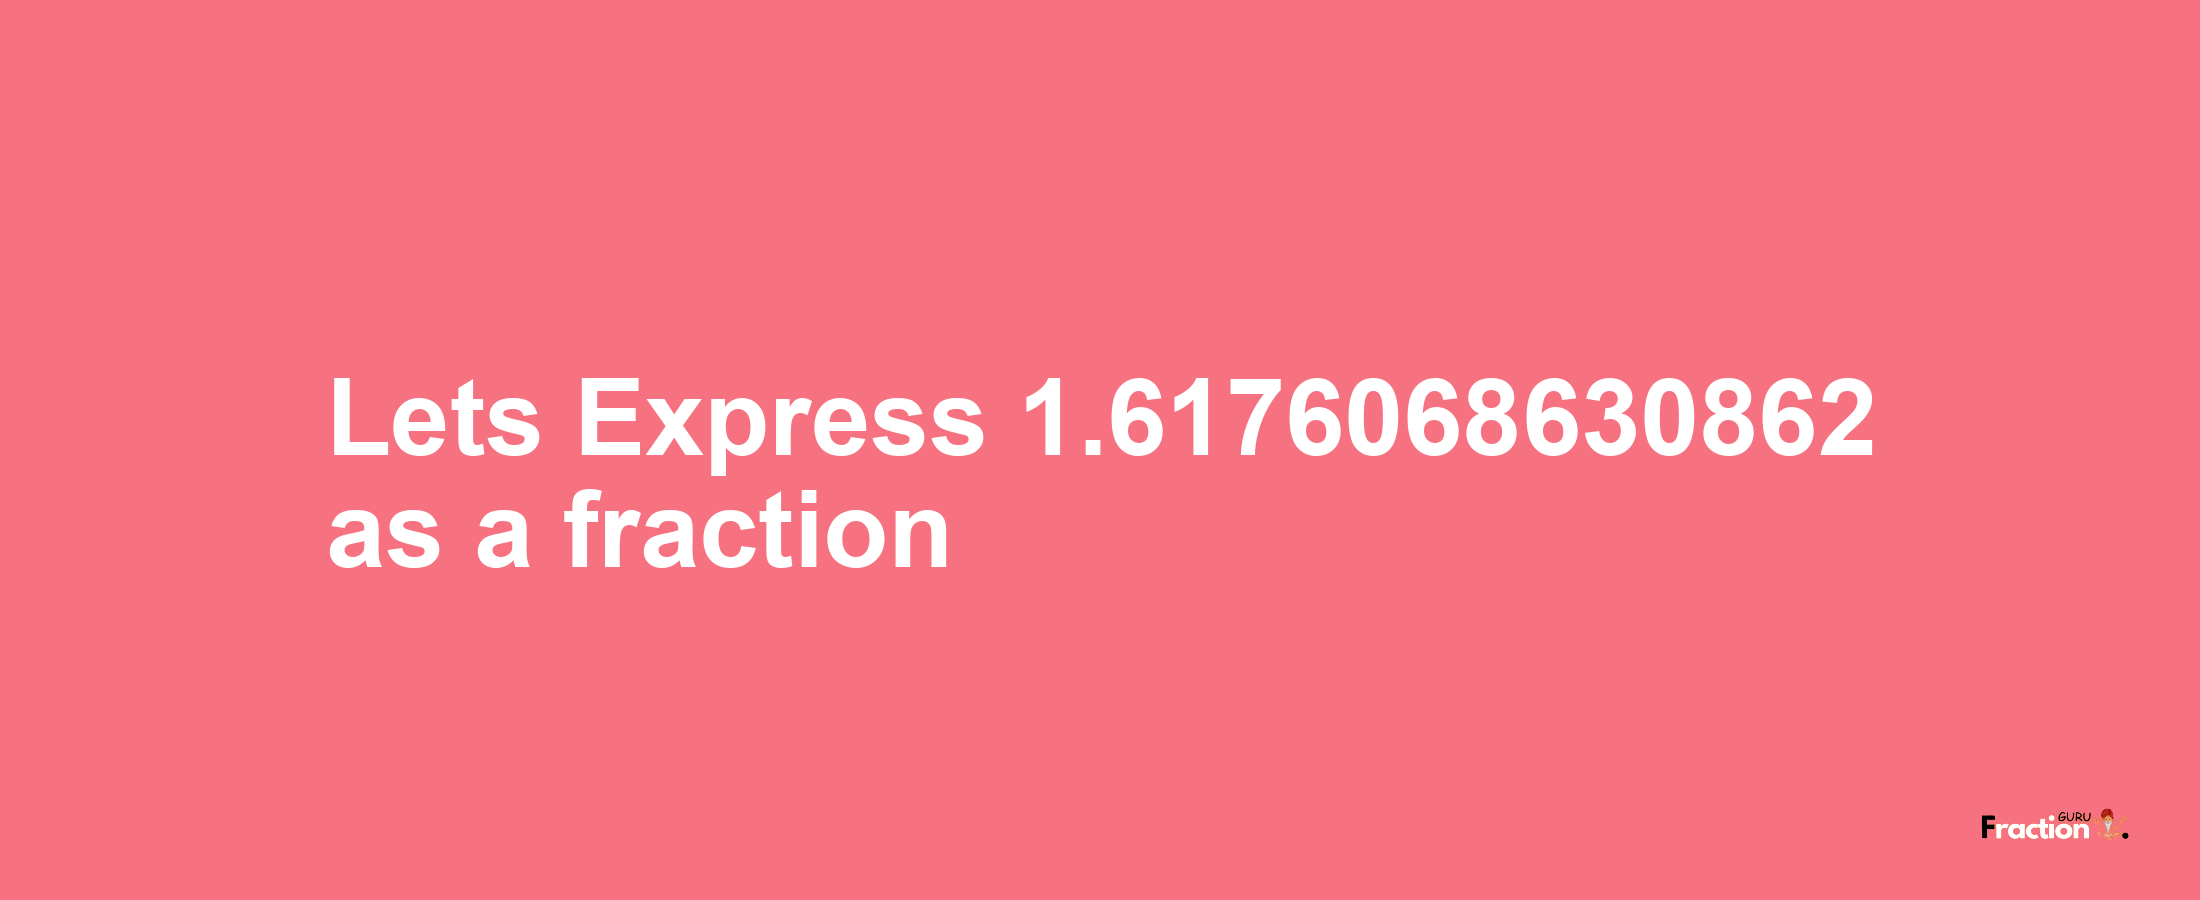 Lets Express 1.6176068630862 as afraction